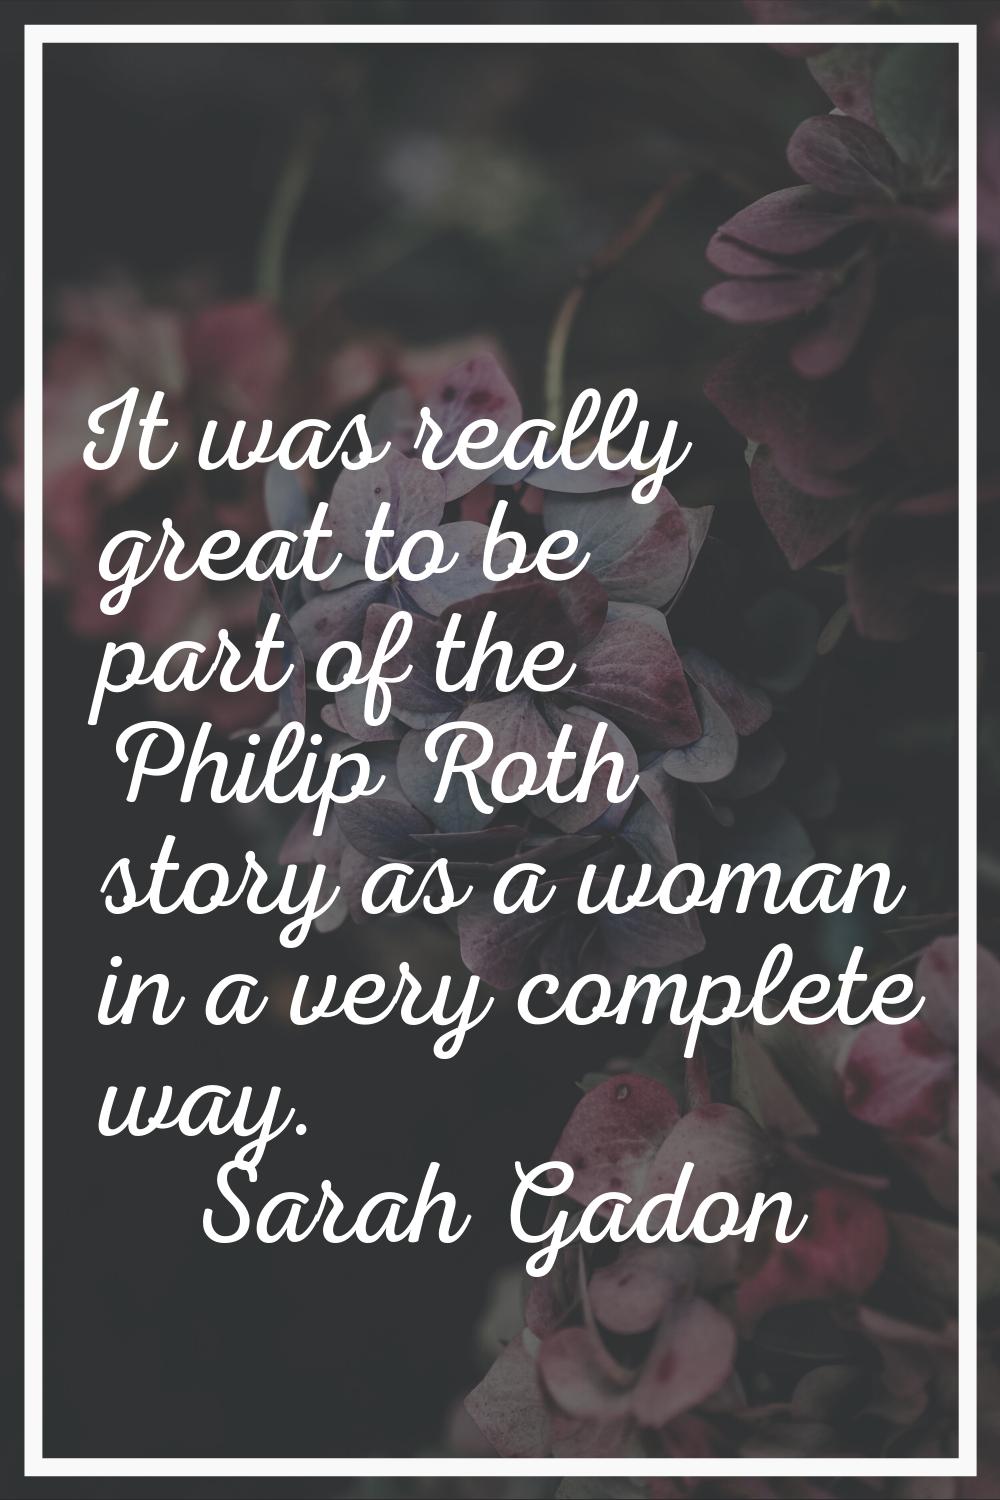 It was really great to be part of the Philip Roth story as a woman in a very complete way.